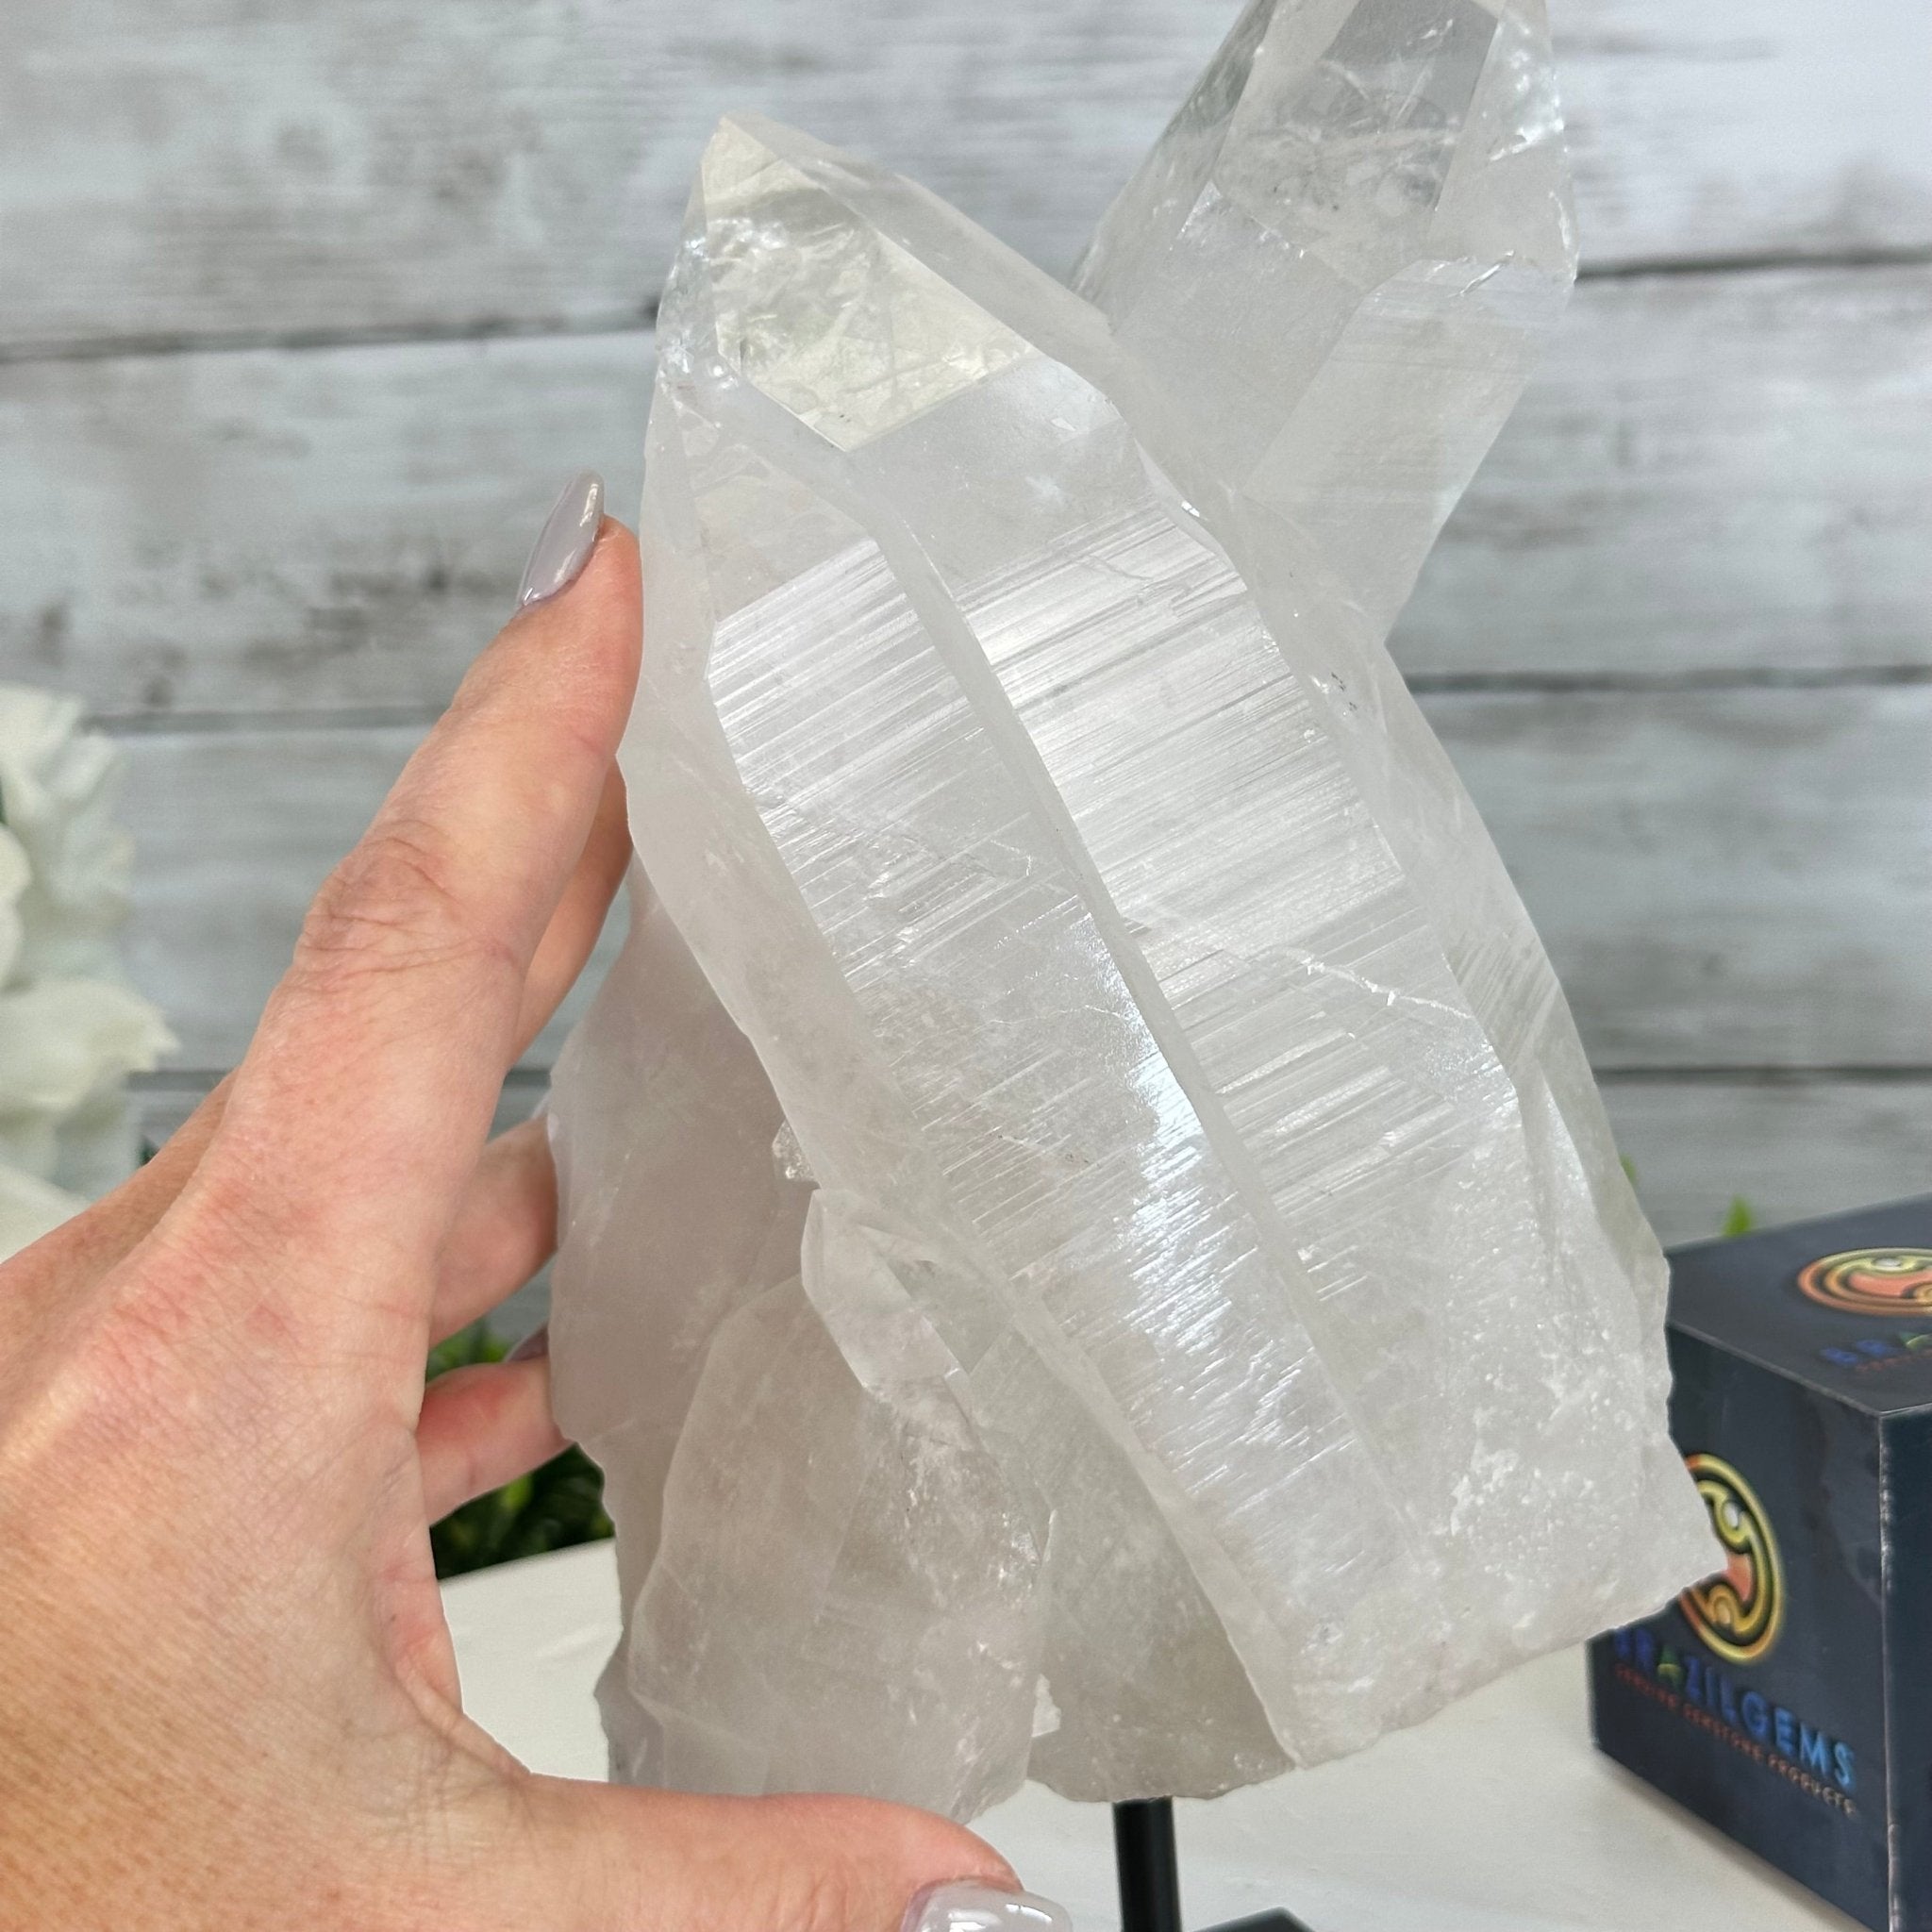 Clear Quartz Crystal Point on Fixed Base, 4.2 lbs & 8.9" Tall #3122CQ-007 - Brazil GemsBrazil GemsClear Quartz Crystal Point on Fixed Base, 4.2 lbs & 8.9" Tall #3122CQ-007Crystal Points3122CQ-007